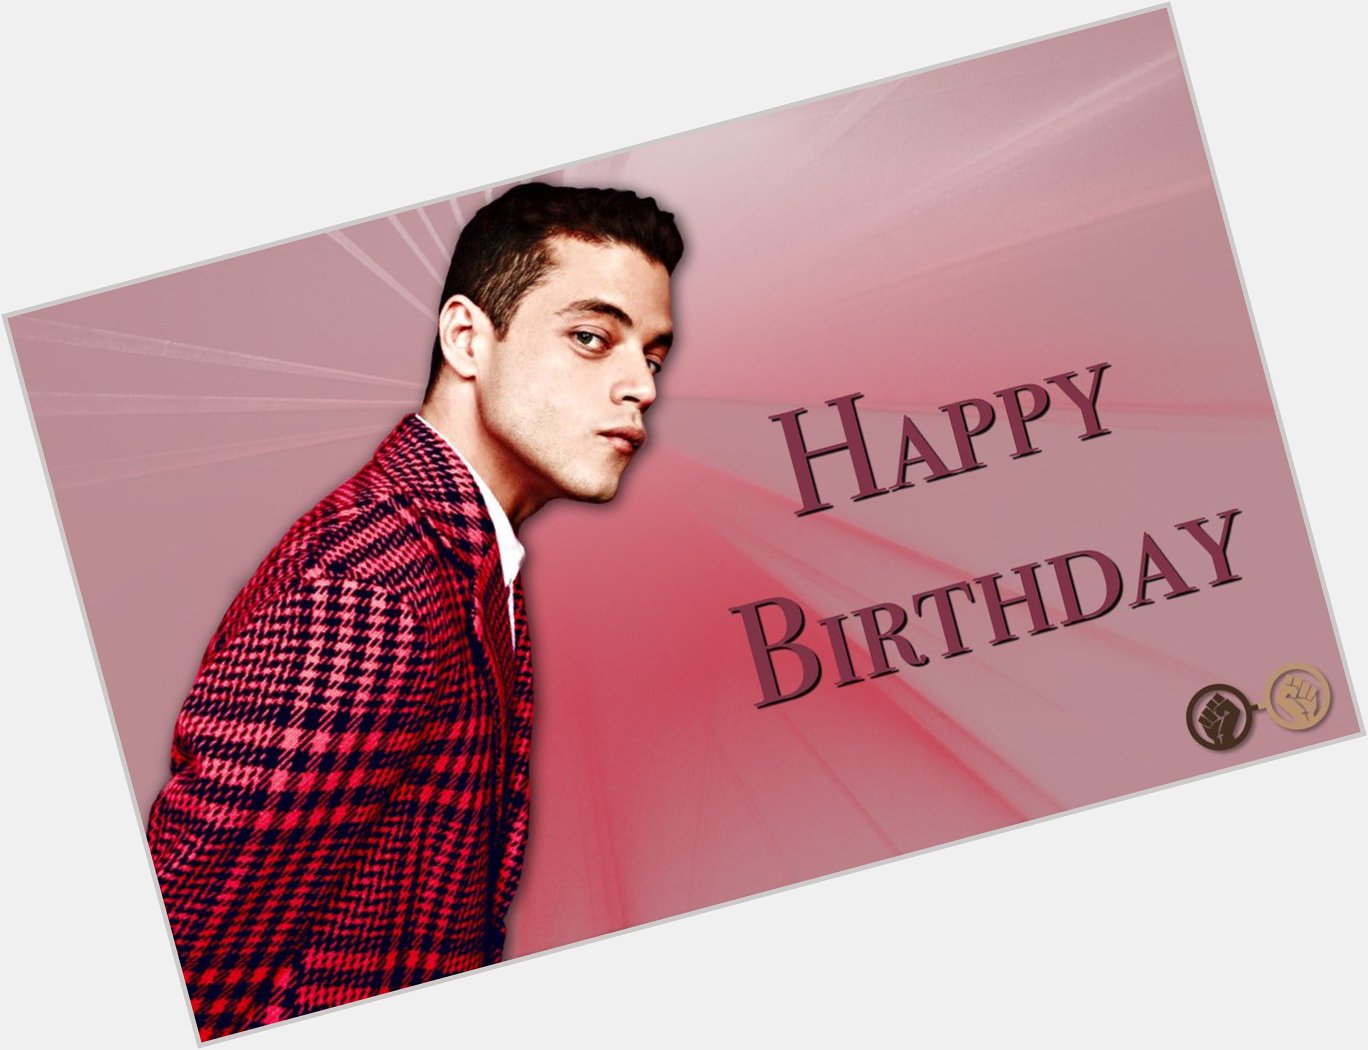 Wishing the incredibly talented Rami Malek a very happy birthday! The \Mr Robot\ star turns 37 today! 